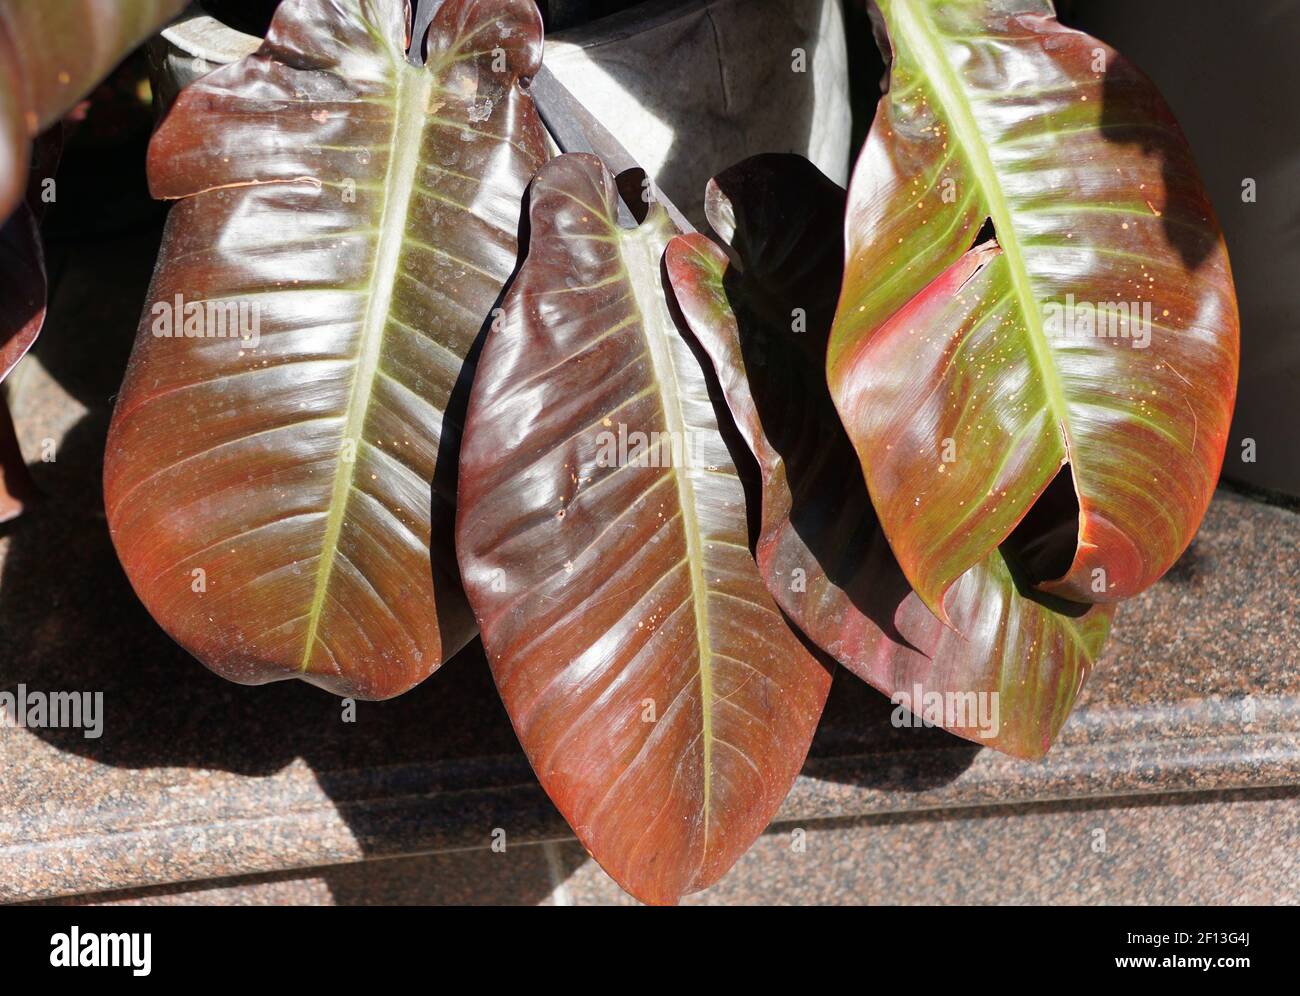 Red-Leaf of Philodendron Black Cardinal, a favorite collector's item for tropical plants Stock Photo